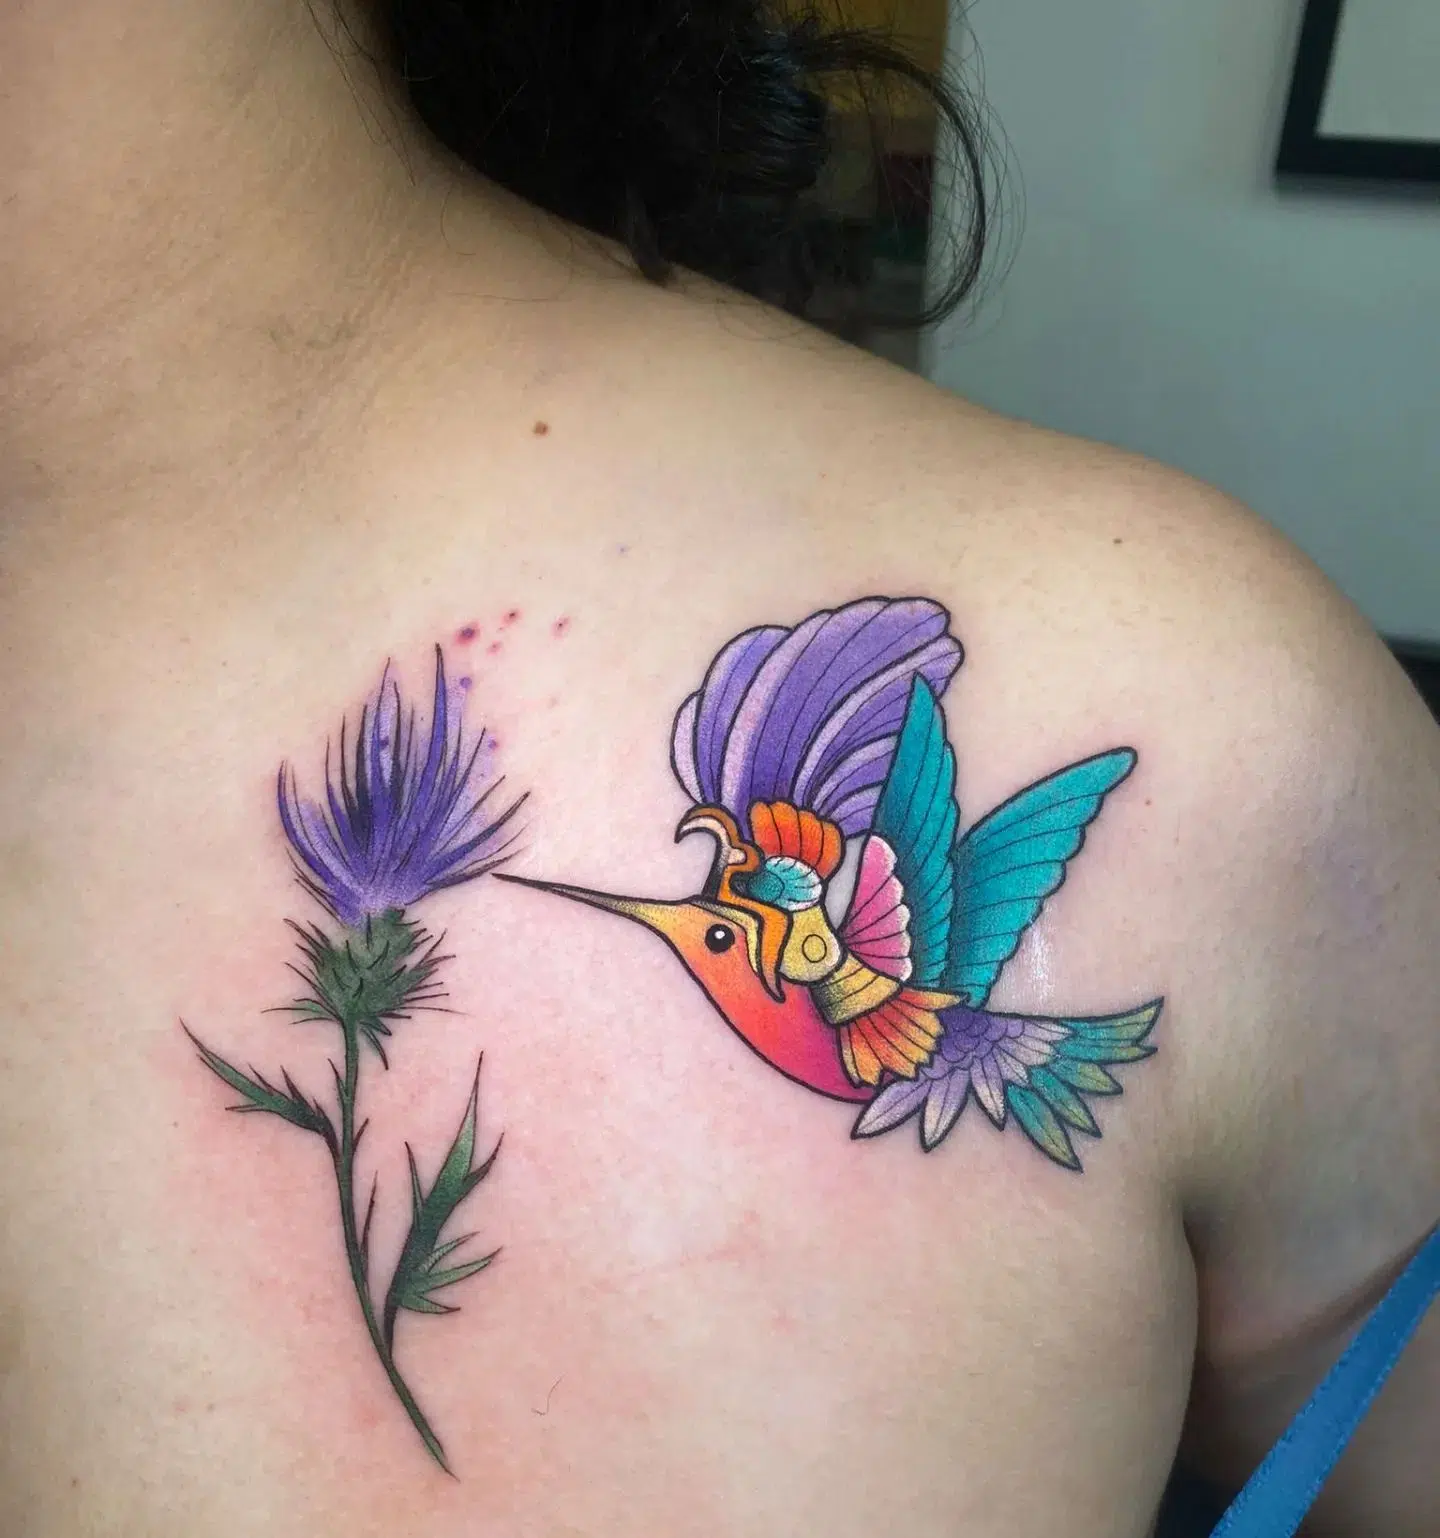 Aztec style hummingbird and watercolour thistle for our pal Mariana. Fab mix of styles by Noemi!
noemi_tattoo

                    